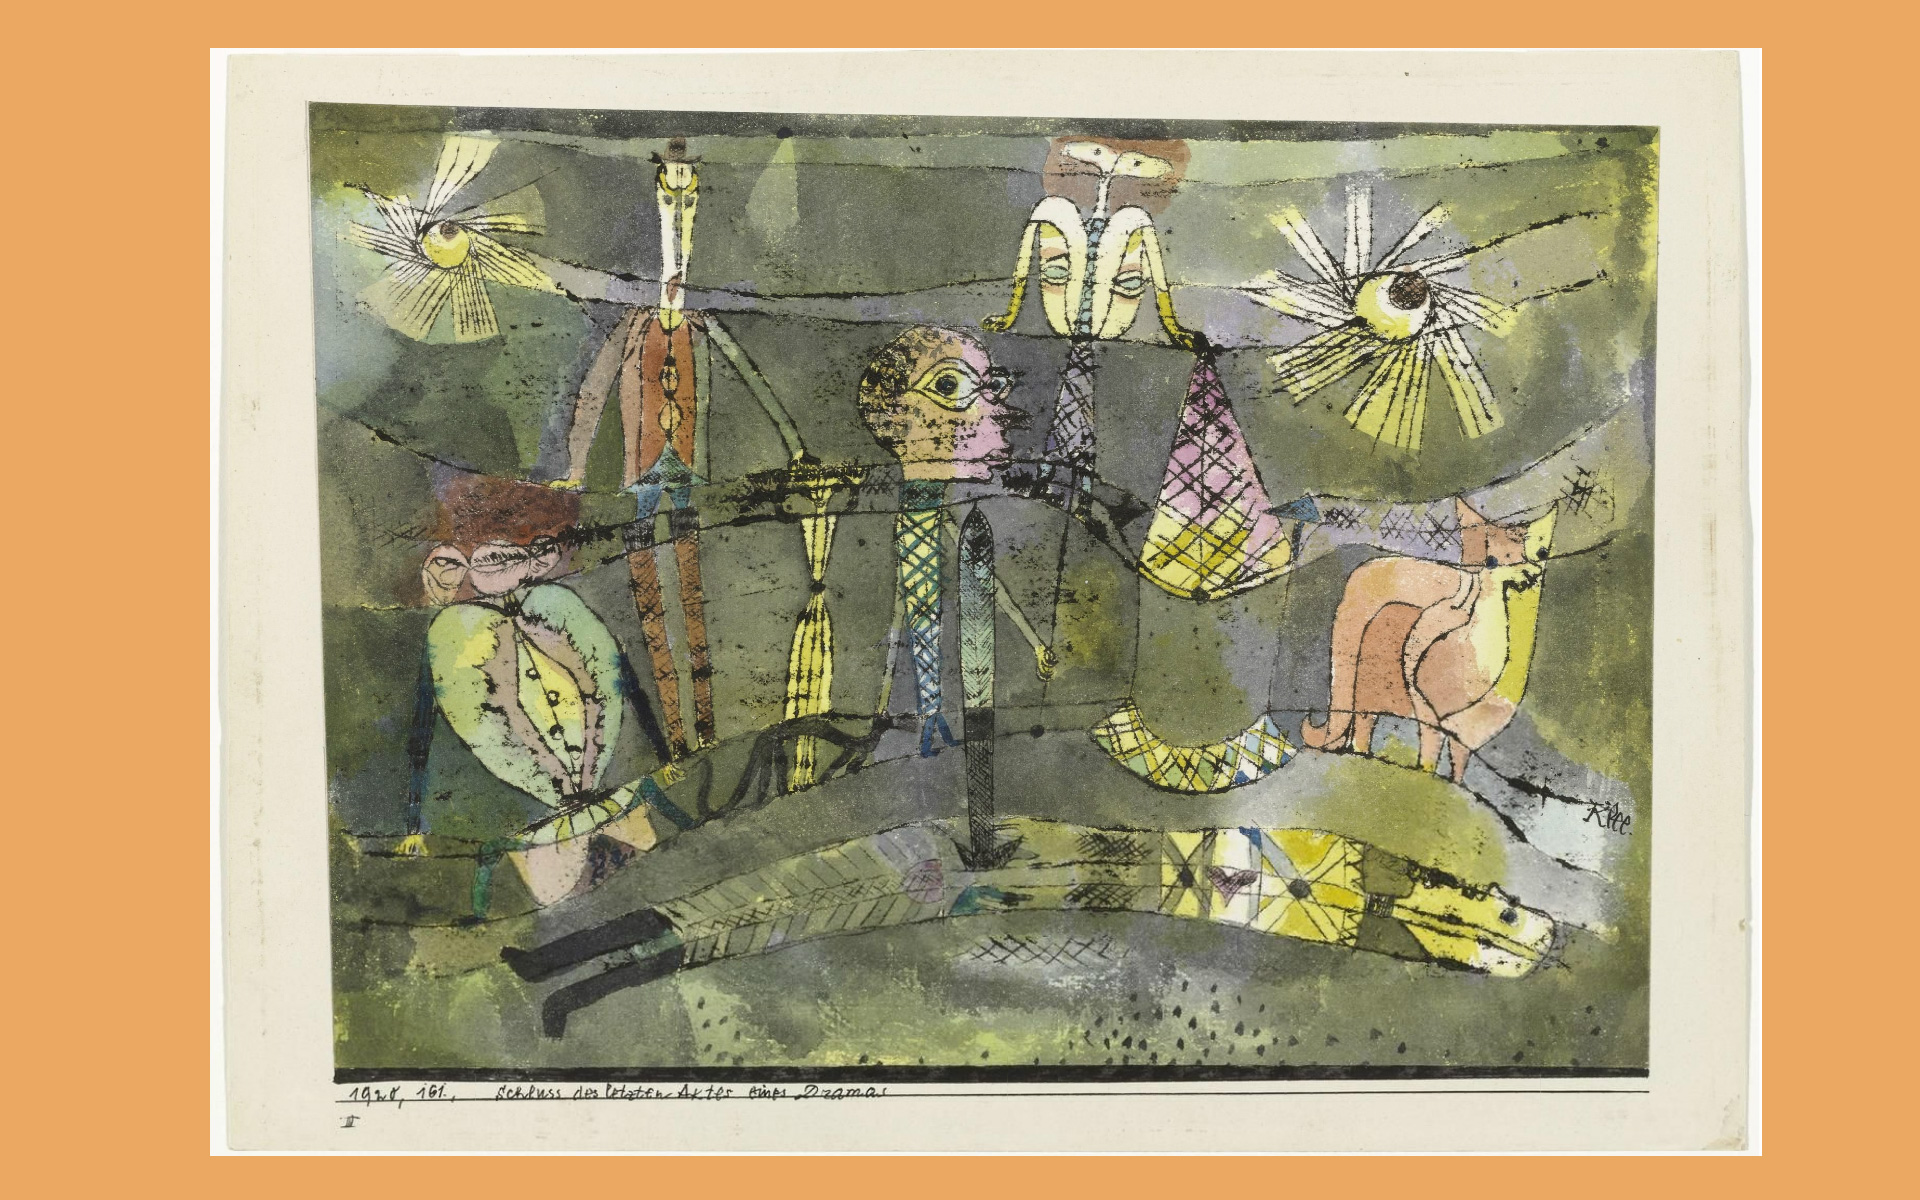 Paul Klee - The End of the Last Act of a Drama